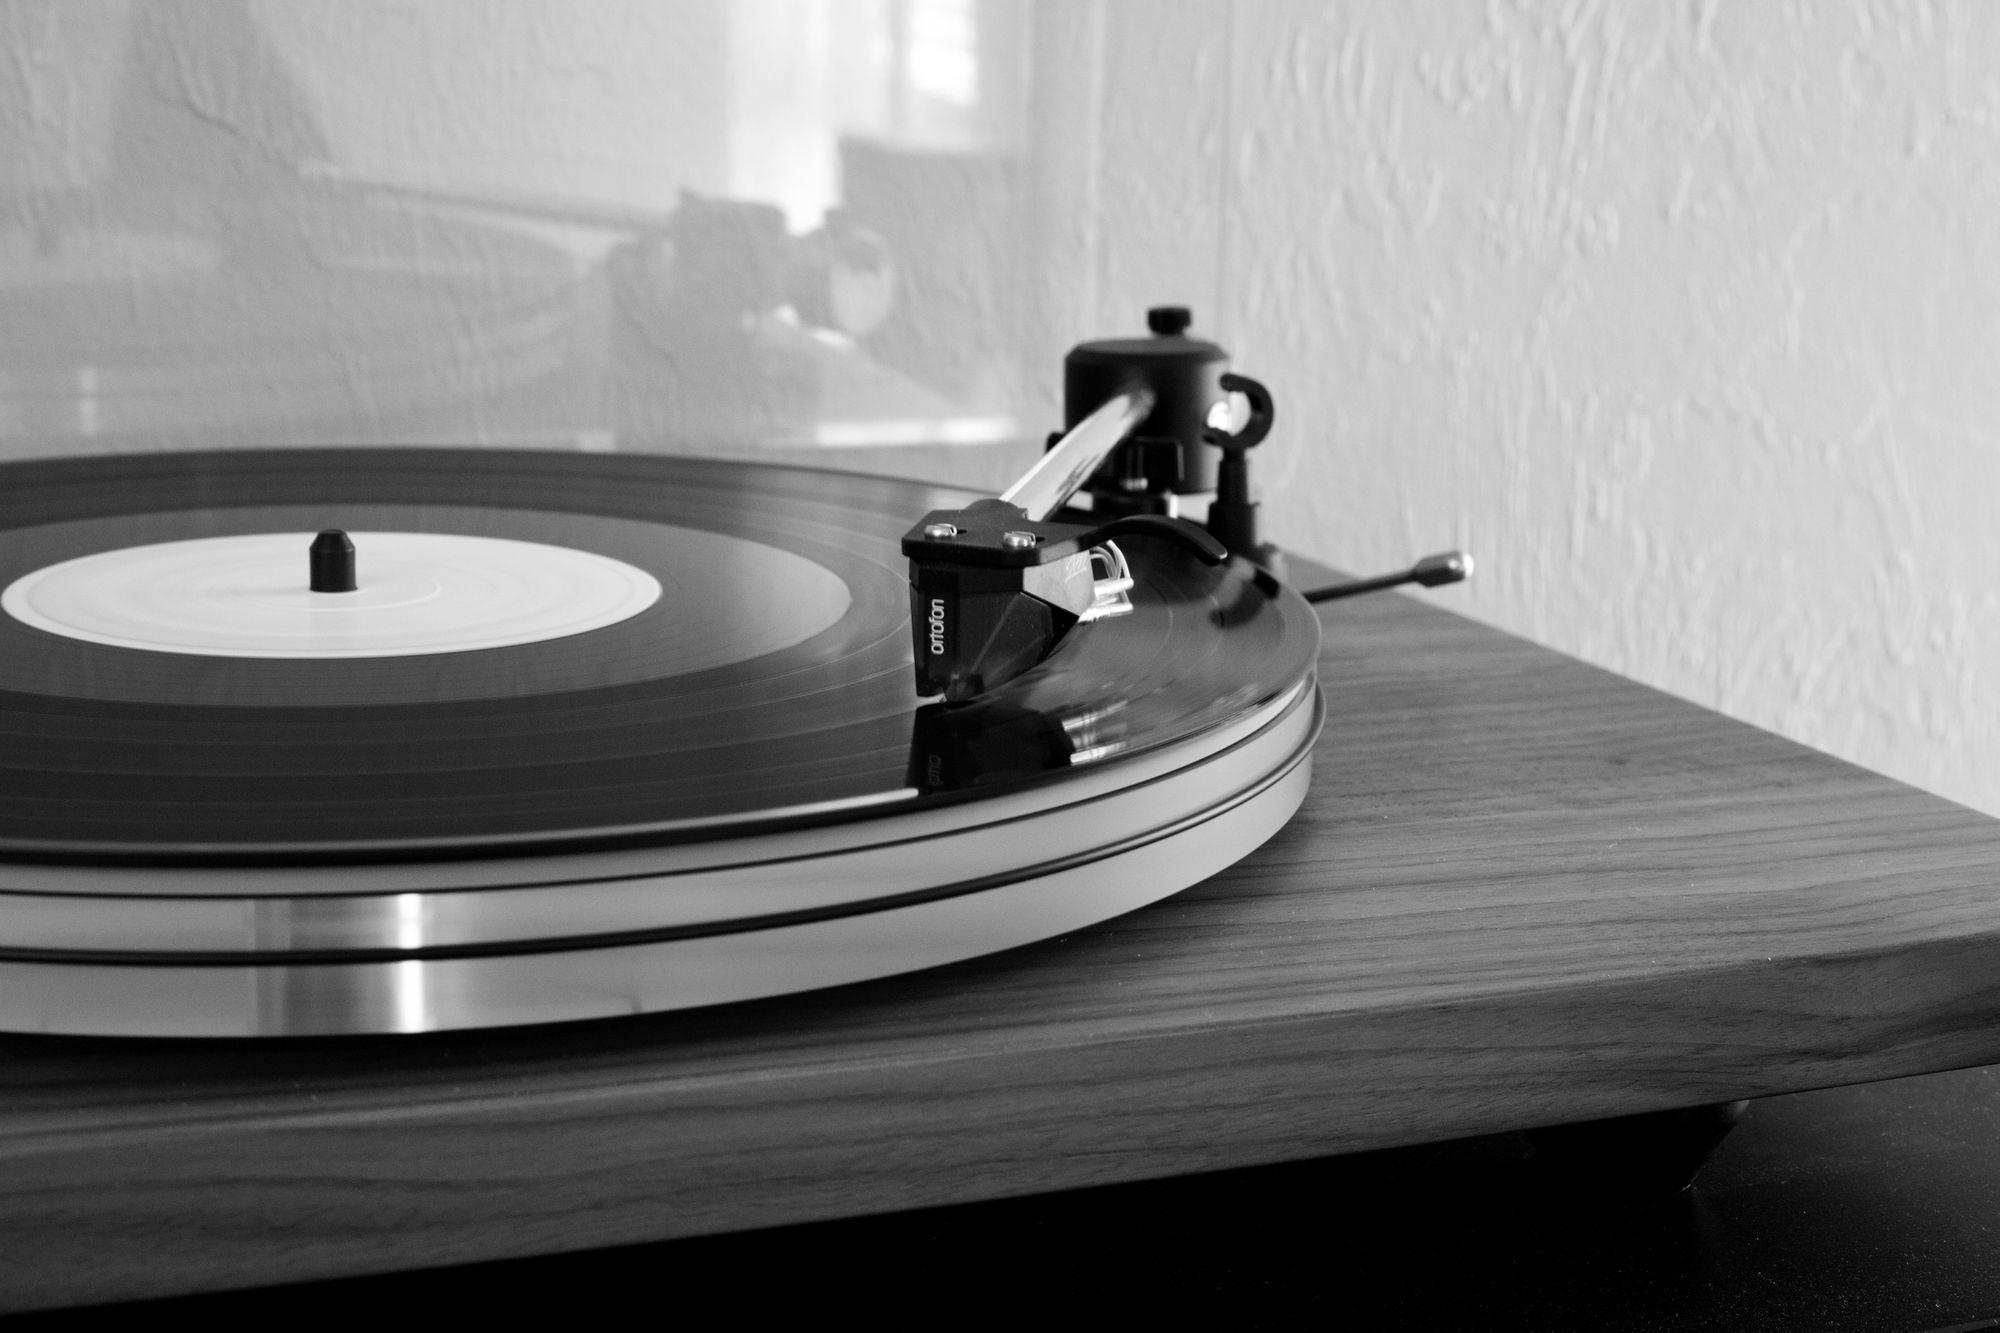 Turntable with spinning vinyl record on it